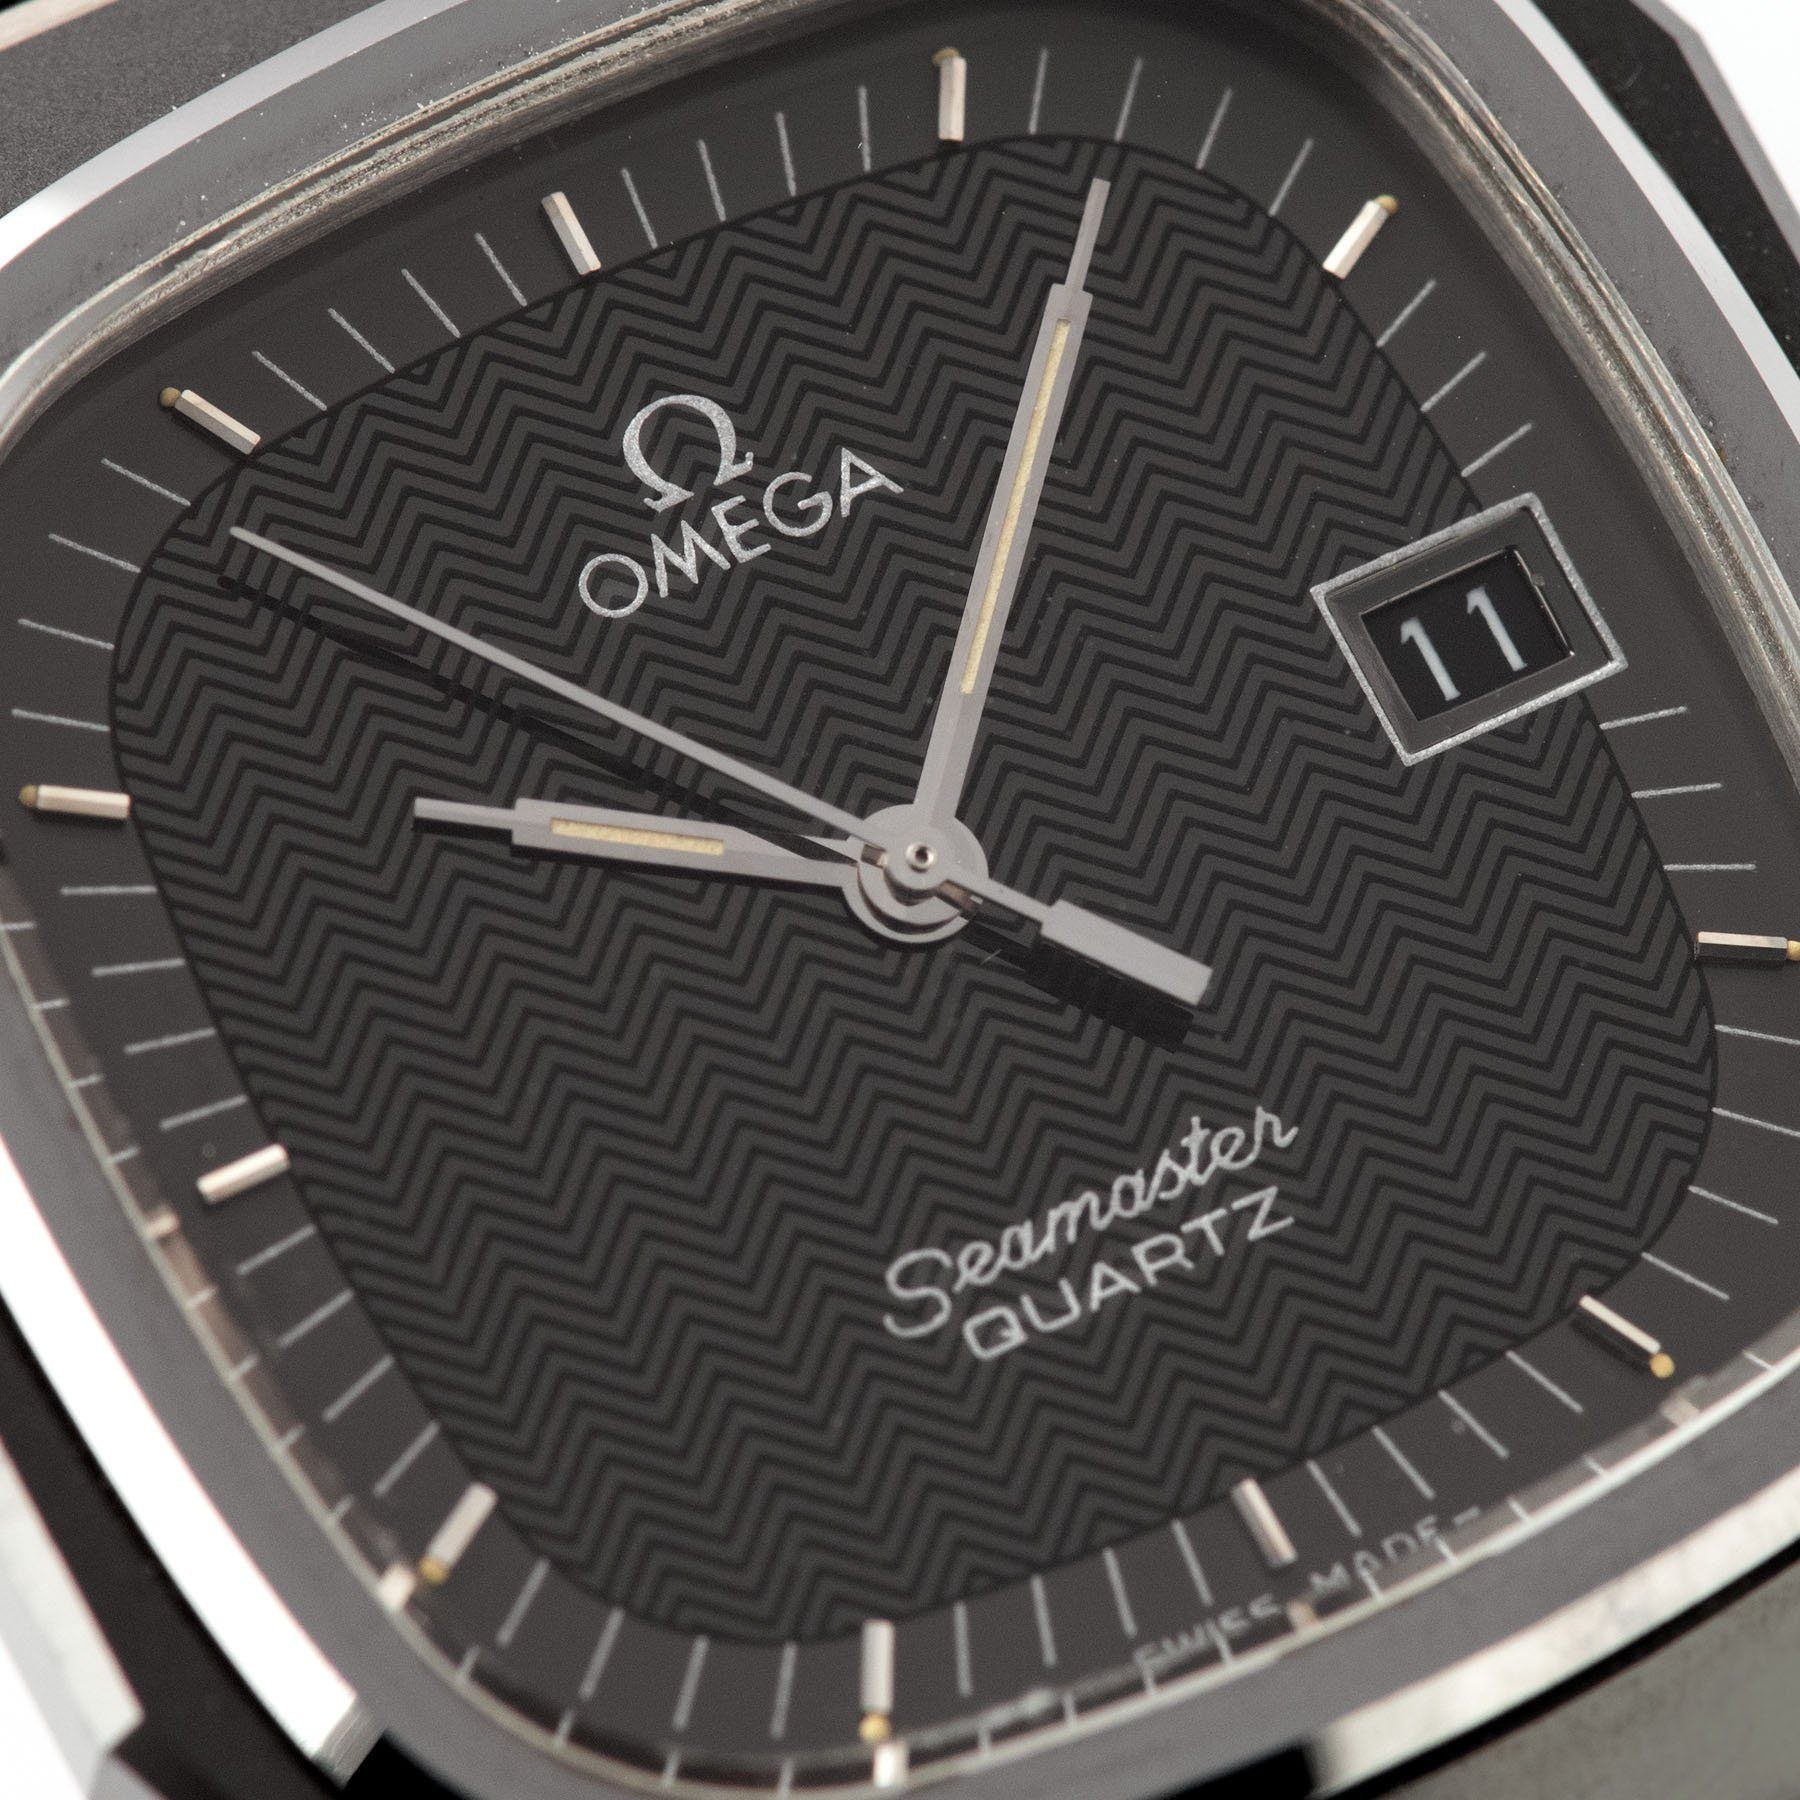 His and Hers Omega Seamaster Ceramic Black Tulip Watch Set